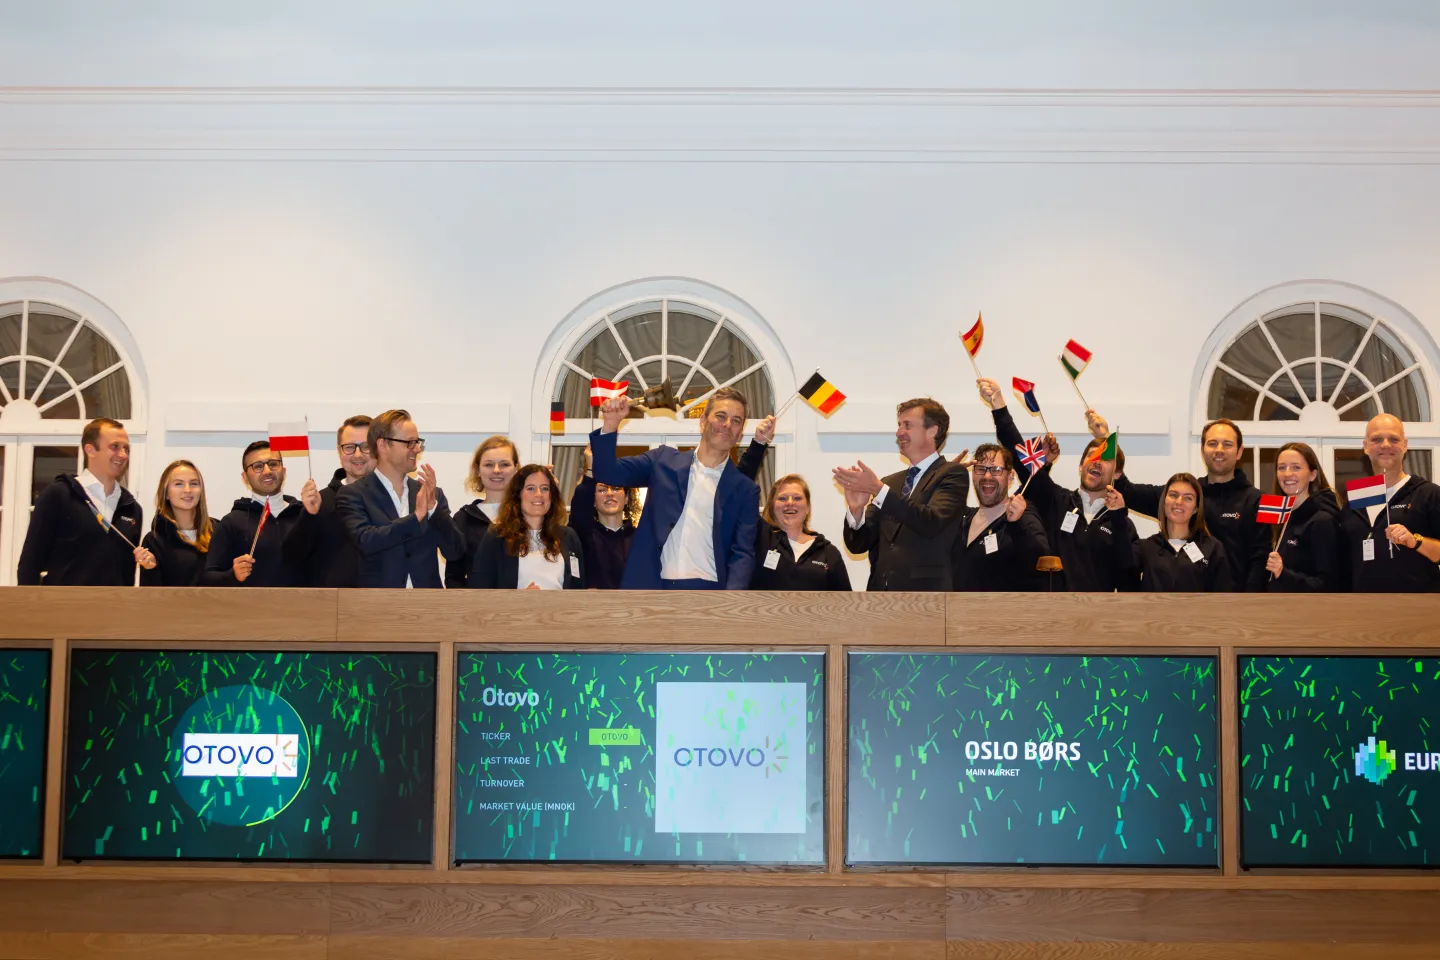 Andreas Torsheim, founder and CEO of Otovo, rang the bell this morning to celebrate the company’s transfer to the Oslo Børs main market. They were welcomed by Øivind Amundsen, CEO and President of Oslo Børs (Photo: Chris Fey/ NTB).